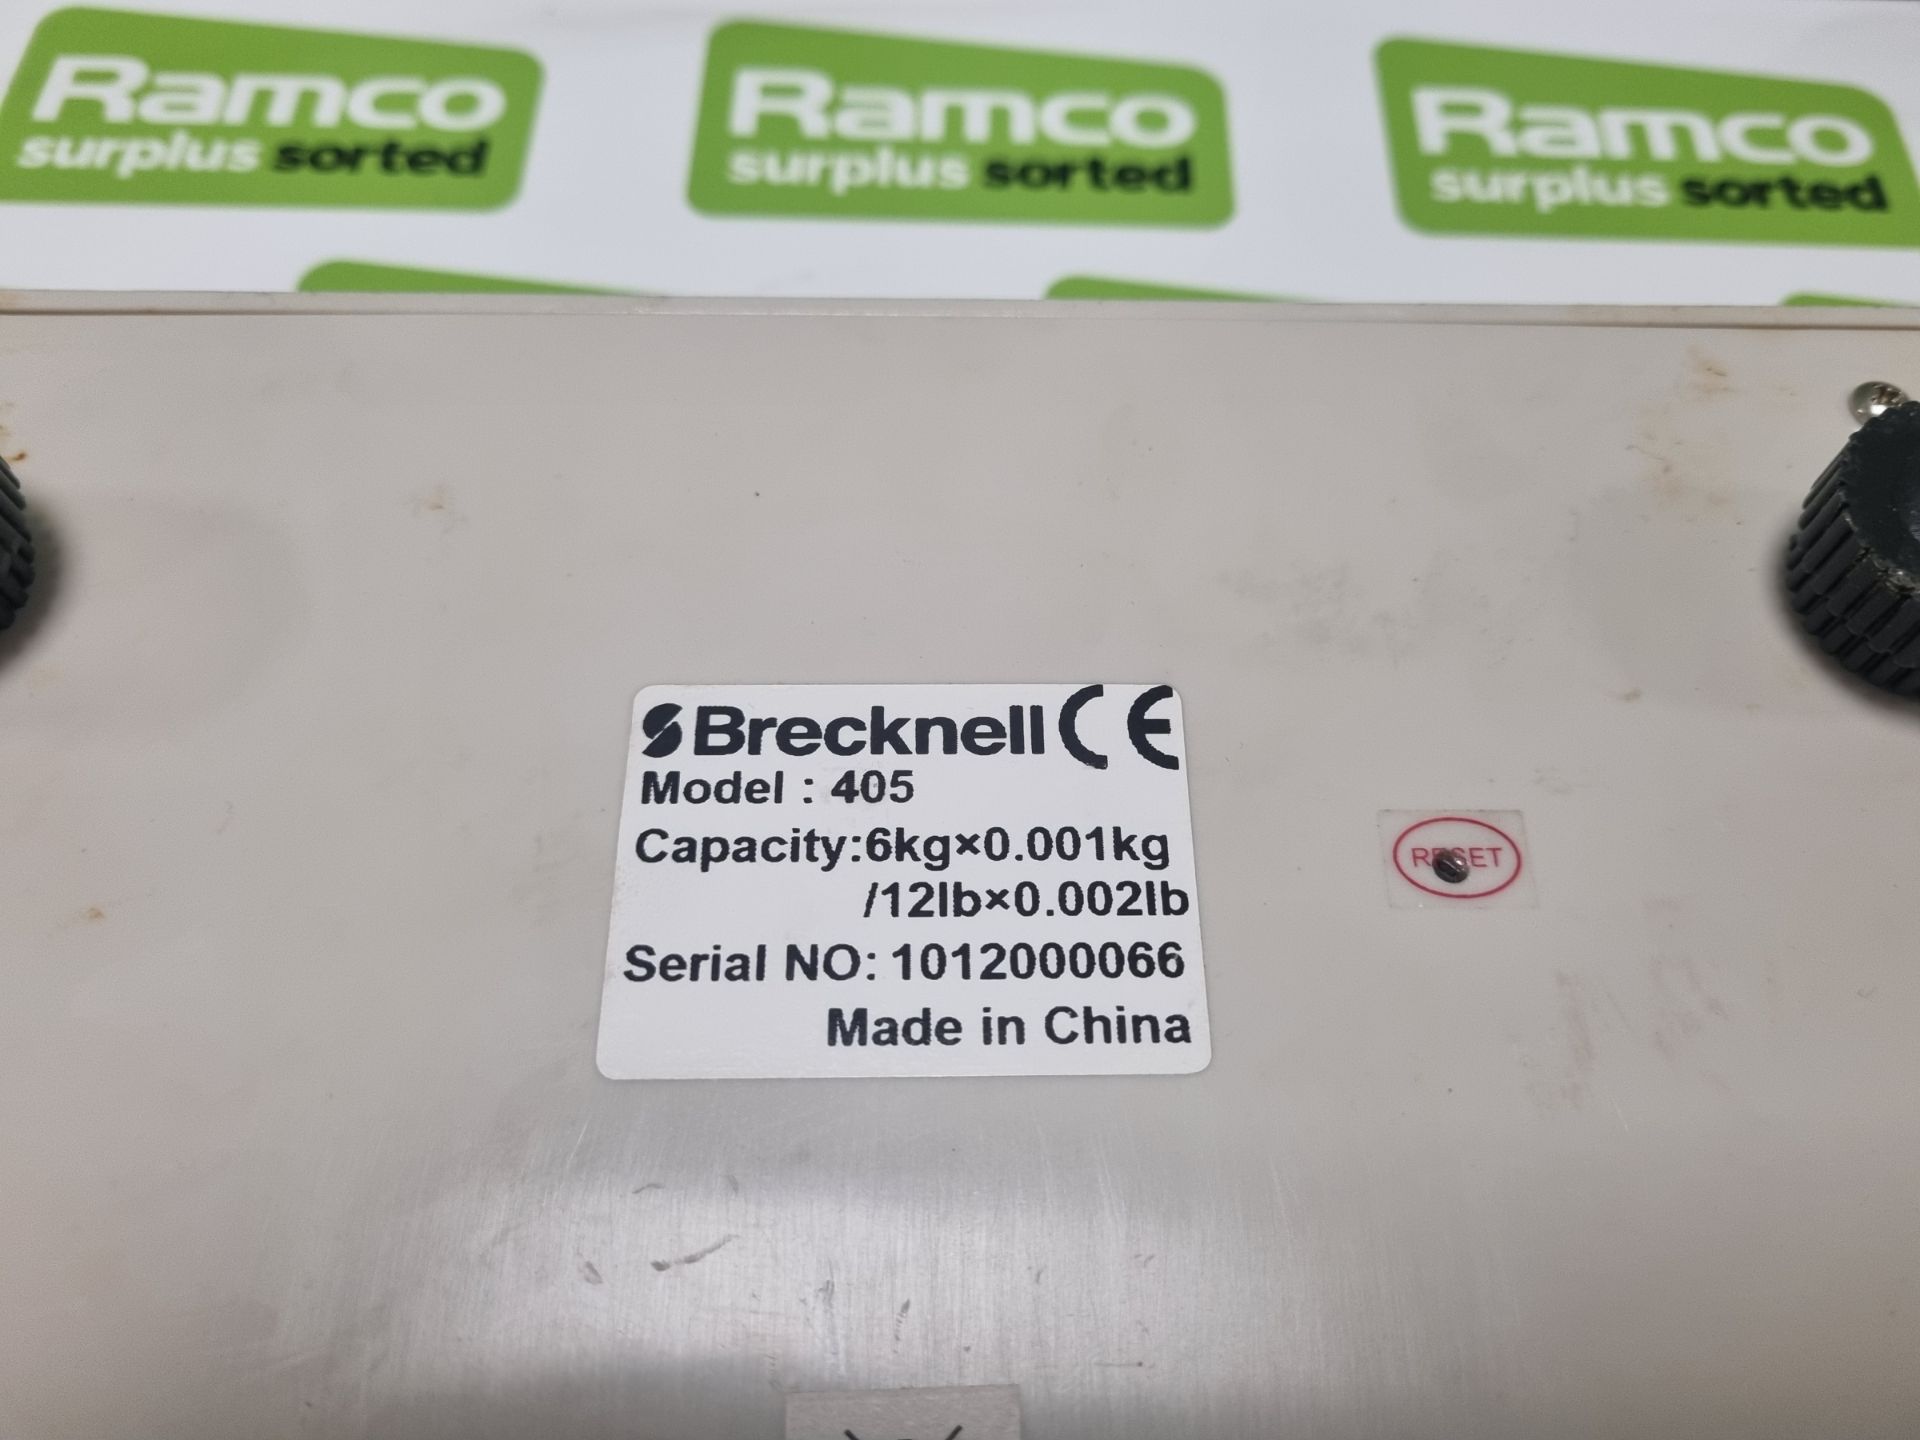 Brecknell 405 LCD Bench Scale - Image 3 of 3